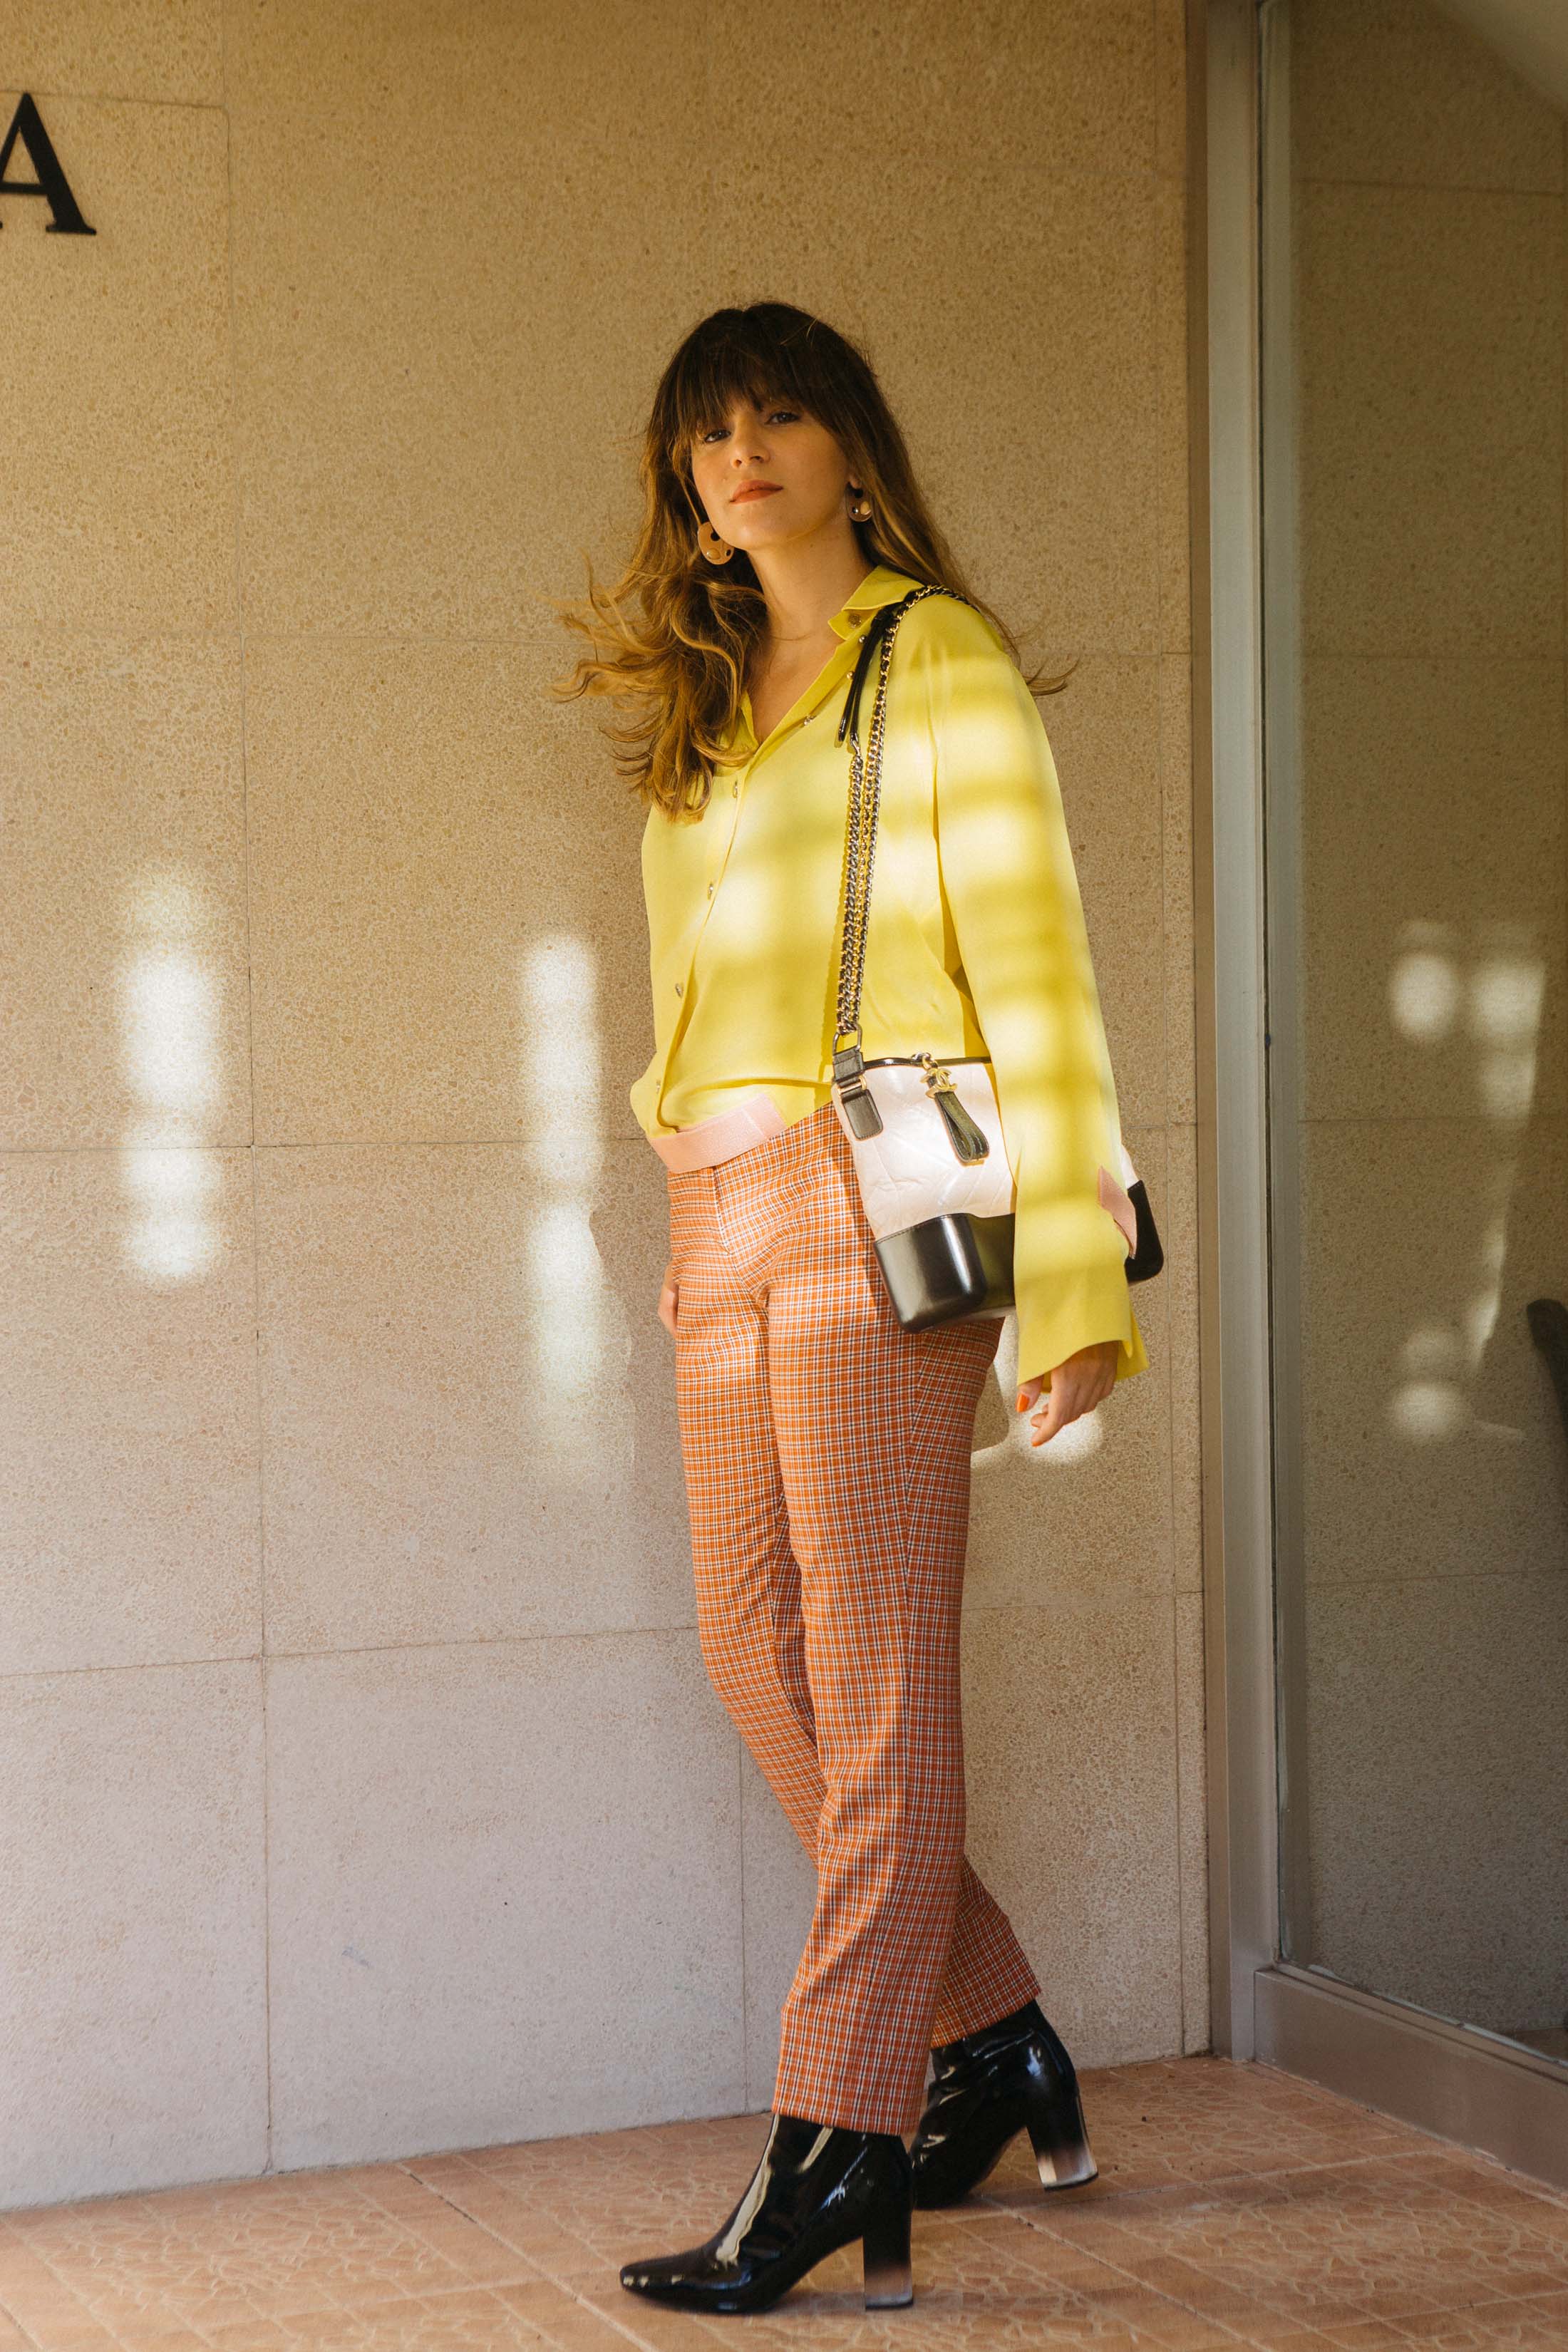 Maristella wears a Spring 2017 blouse from Chanel, Purificacion Garcia pants, Zara boots and Chanel Gabrielle bag in two tone leather